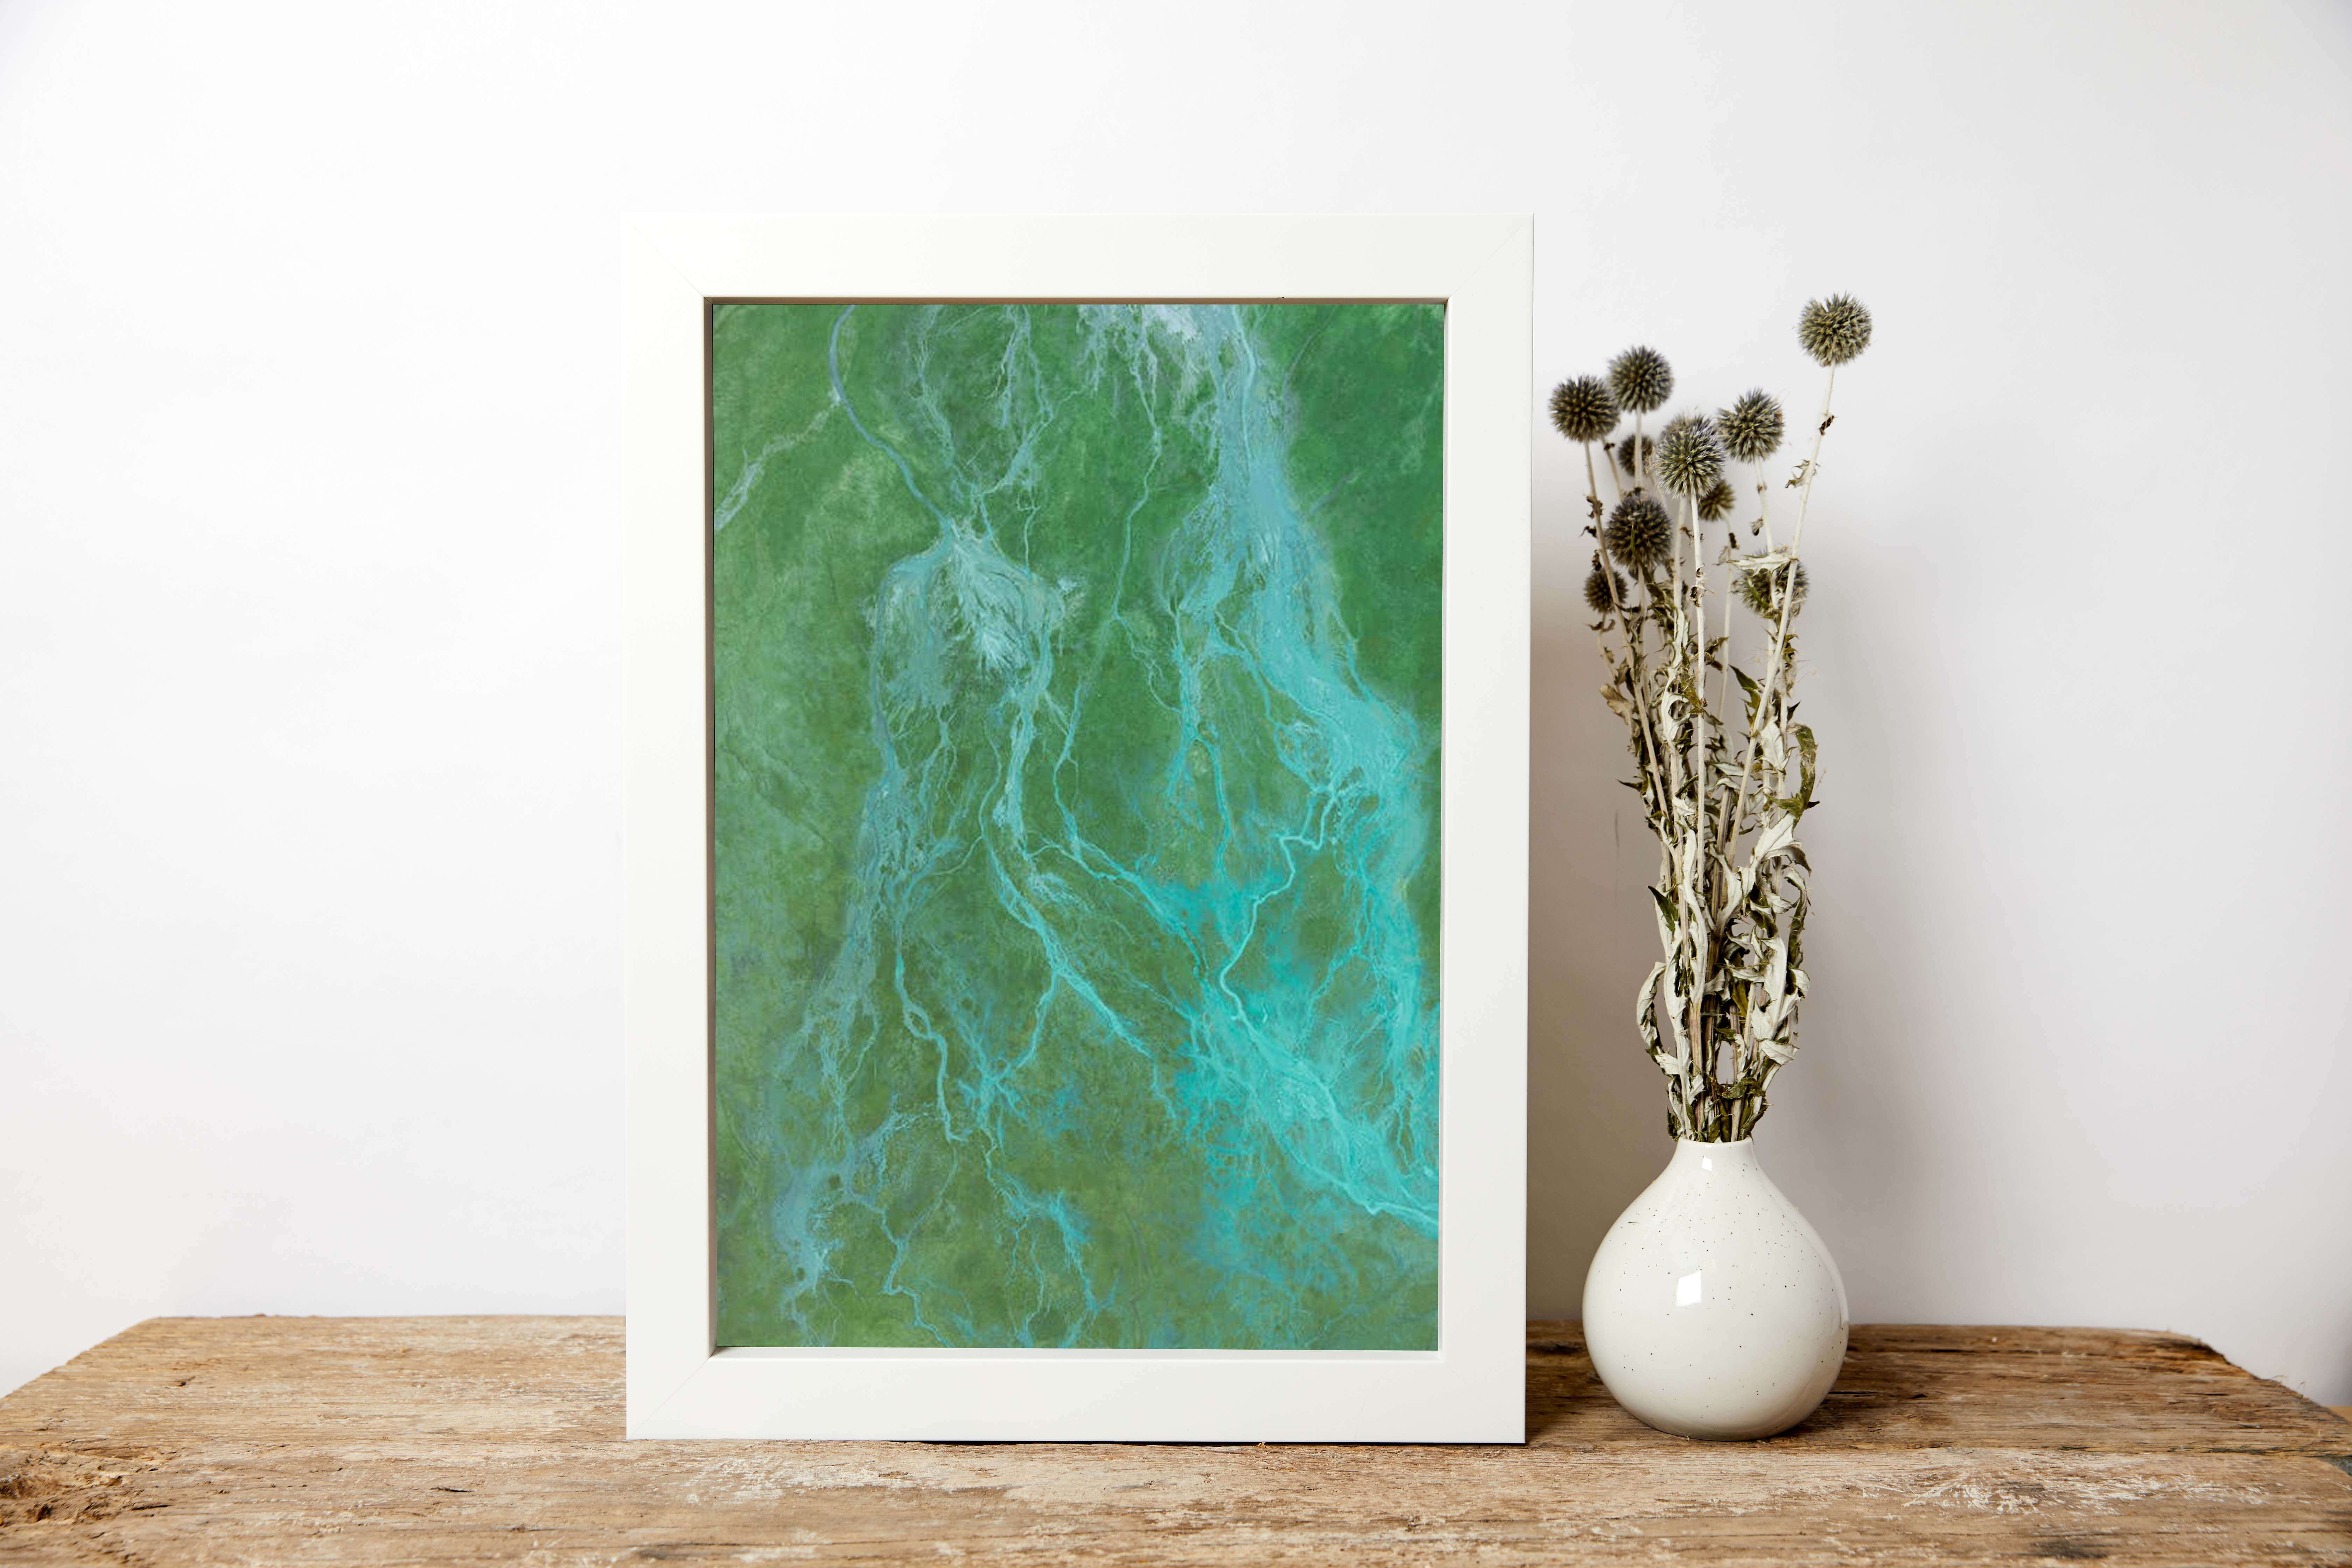 Personalised quality abstract canvas prints and unique artwork for an affordable price with free next day delivery uk